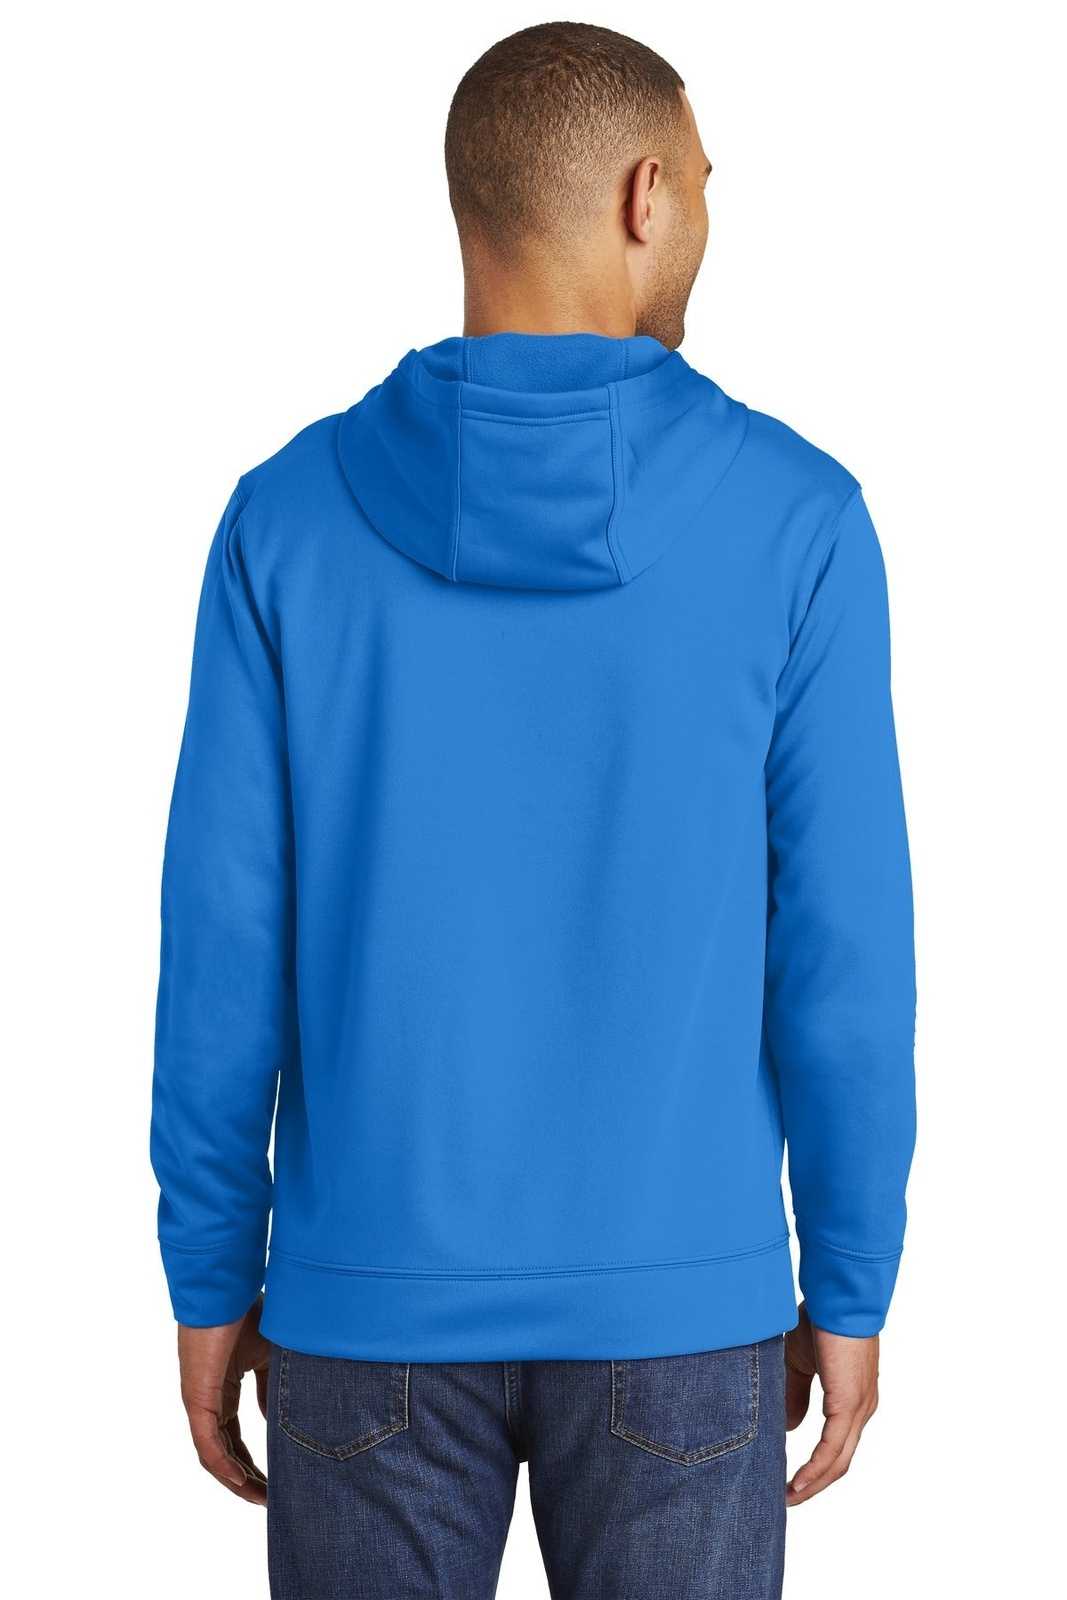 Port &amp; Company PC590H Performance Fleece Pullover Hooded Sweatshirt - Royal - HIT a Double - 2